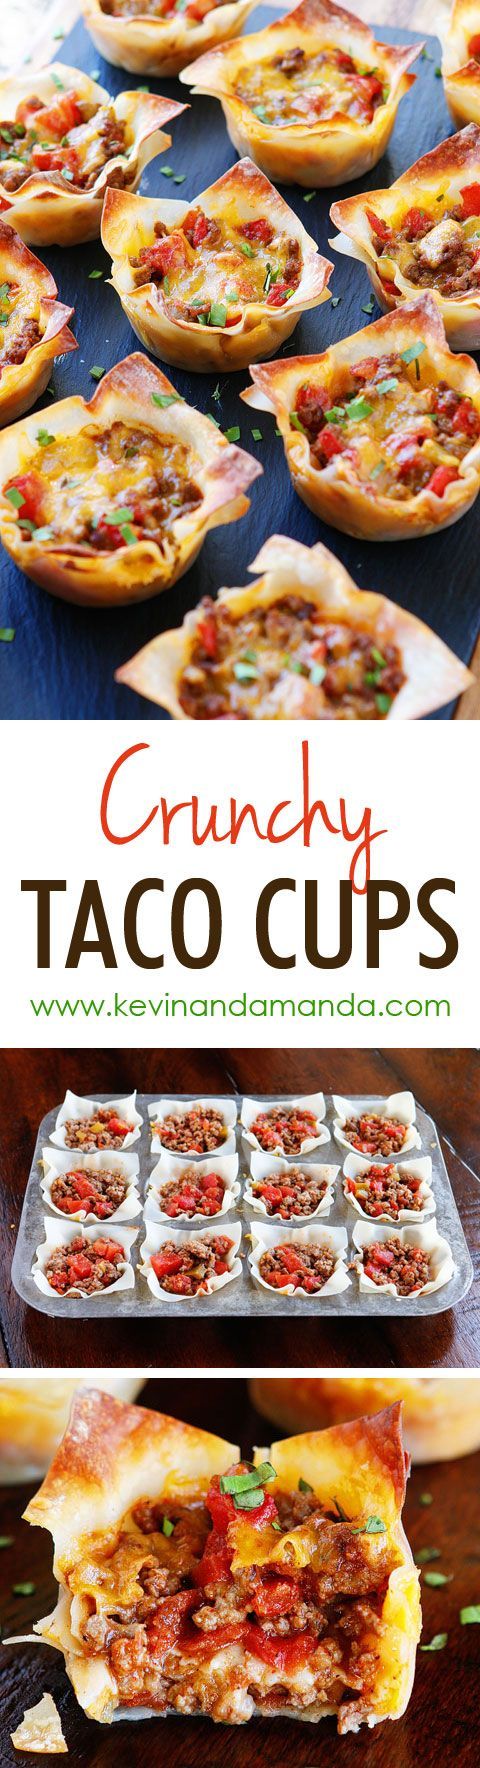 These fun Crunchy Taco Cups are made in a muffin tin with wonton wrappers!  Great for a taco party/bar. Everyone can add their